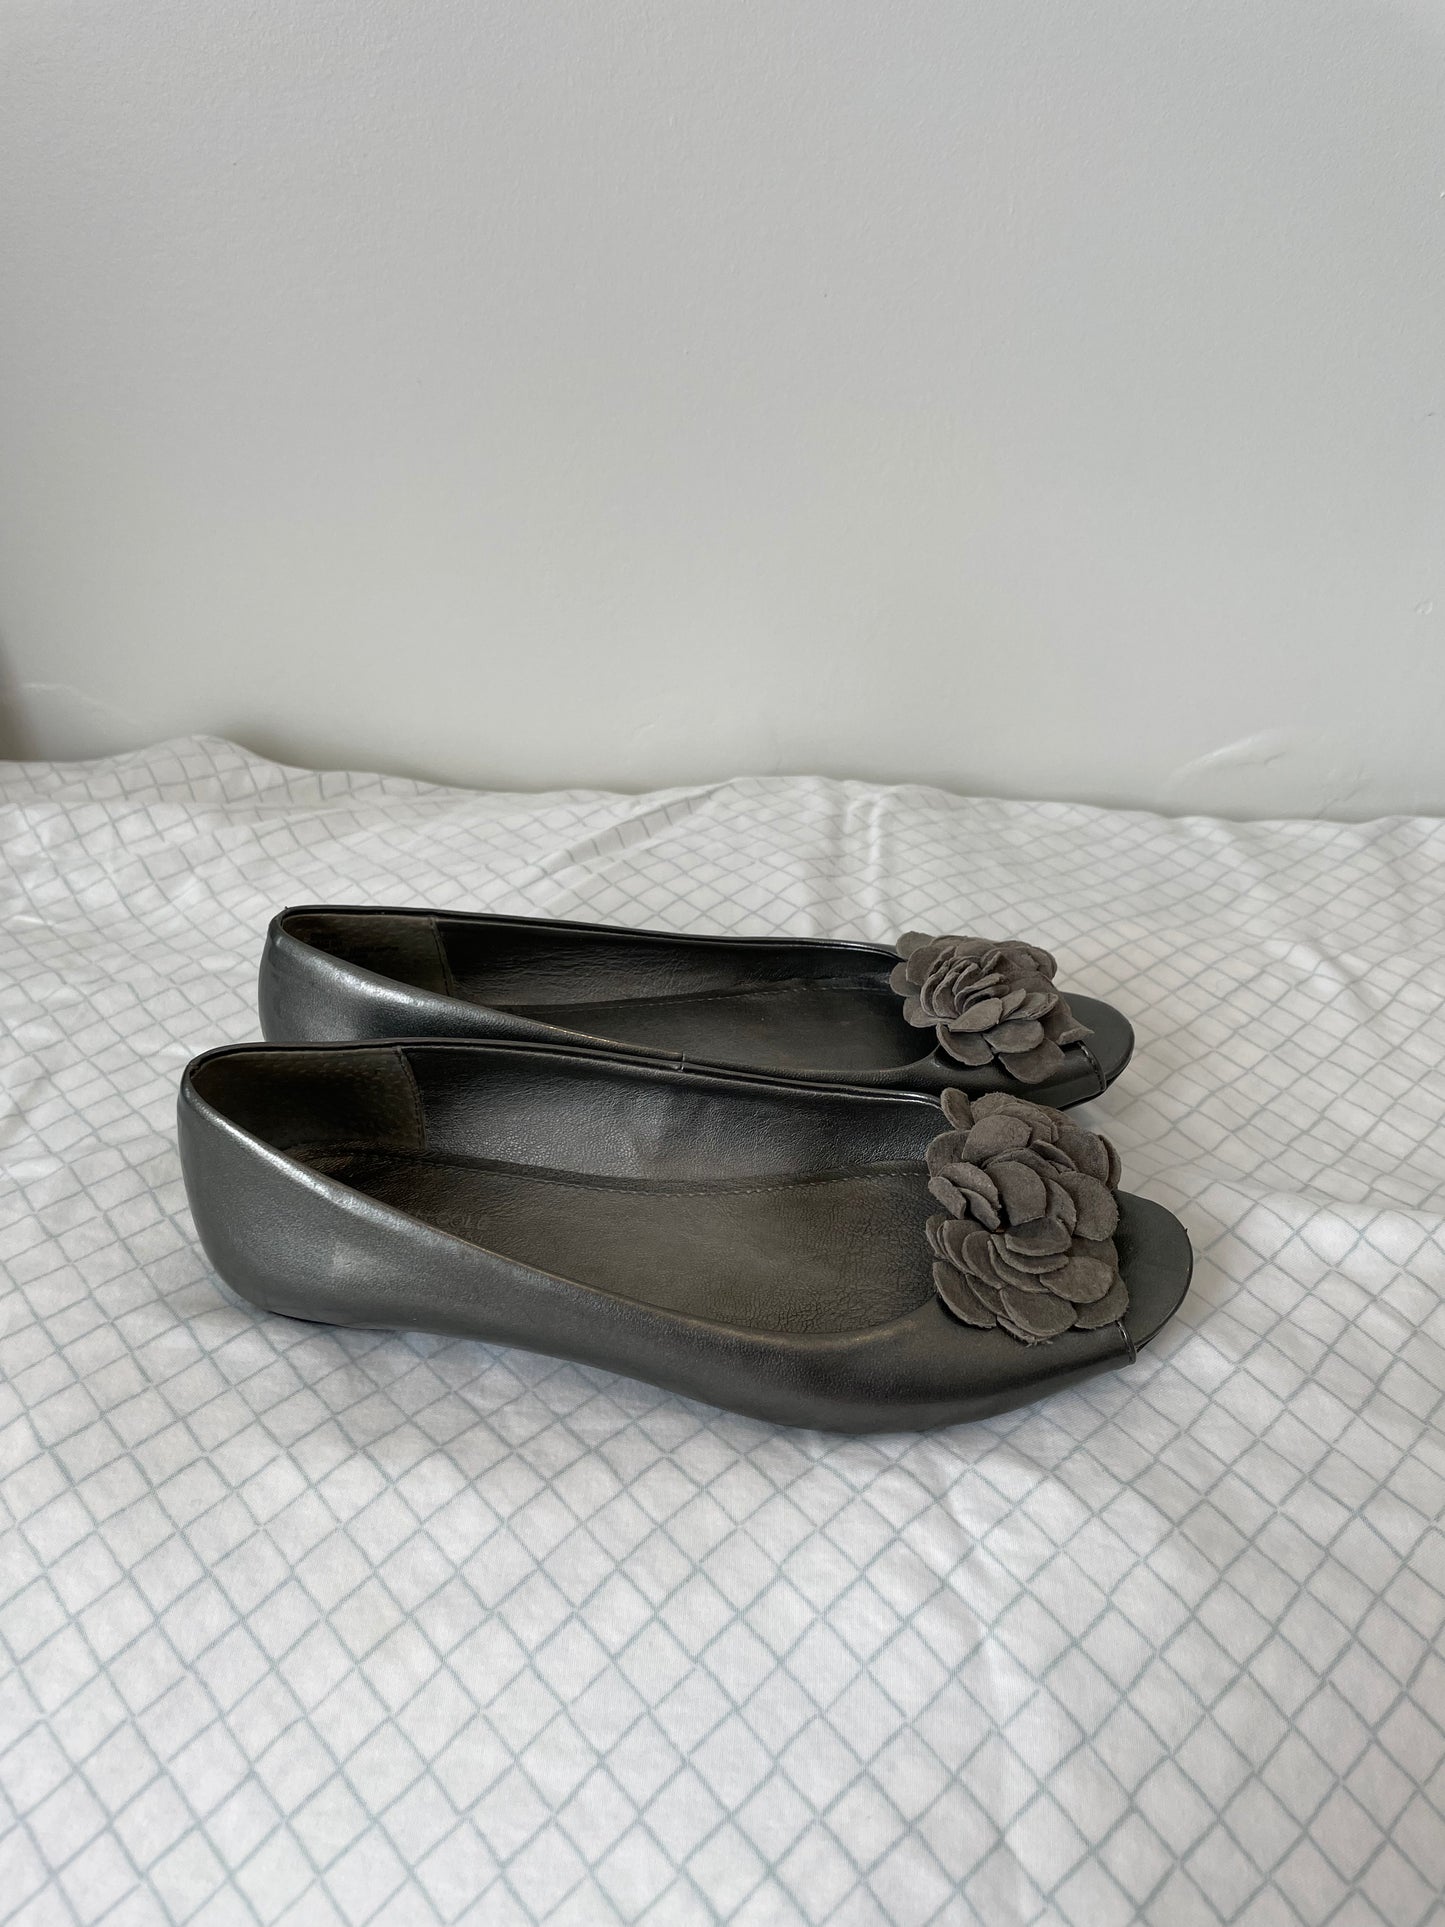 Kenneth Cole Silver Patent Style Leather Toe Applique Peep Toe Flats - Size 6